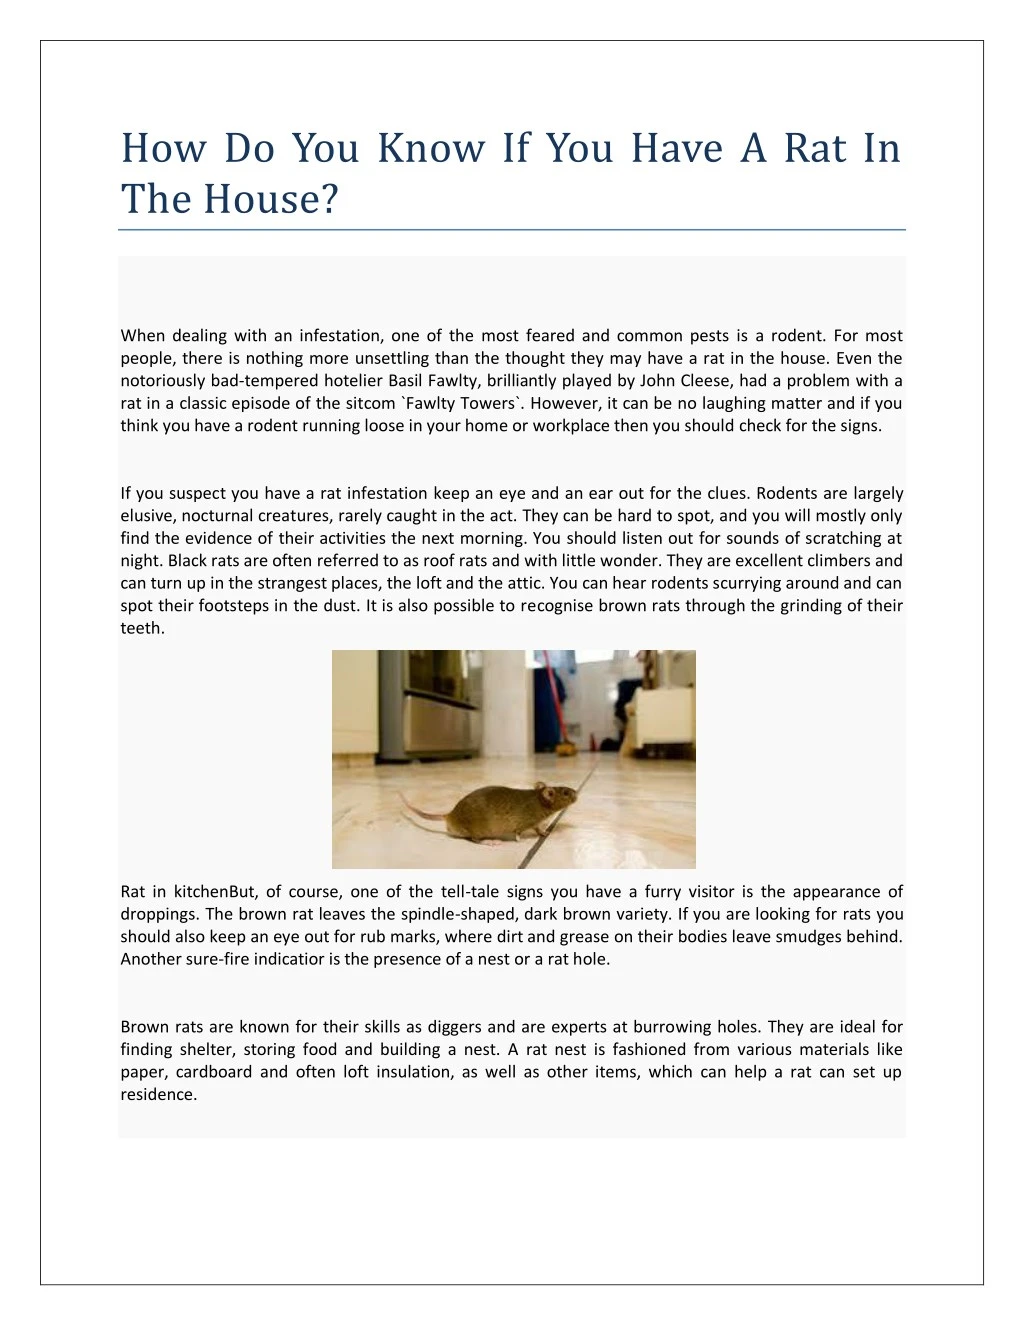 how do you know if you have a rat in the house